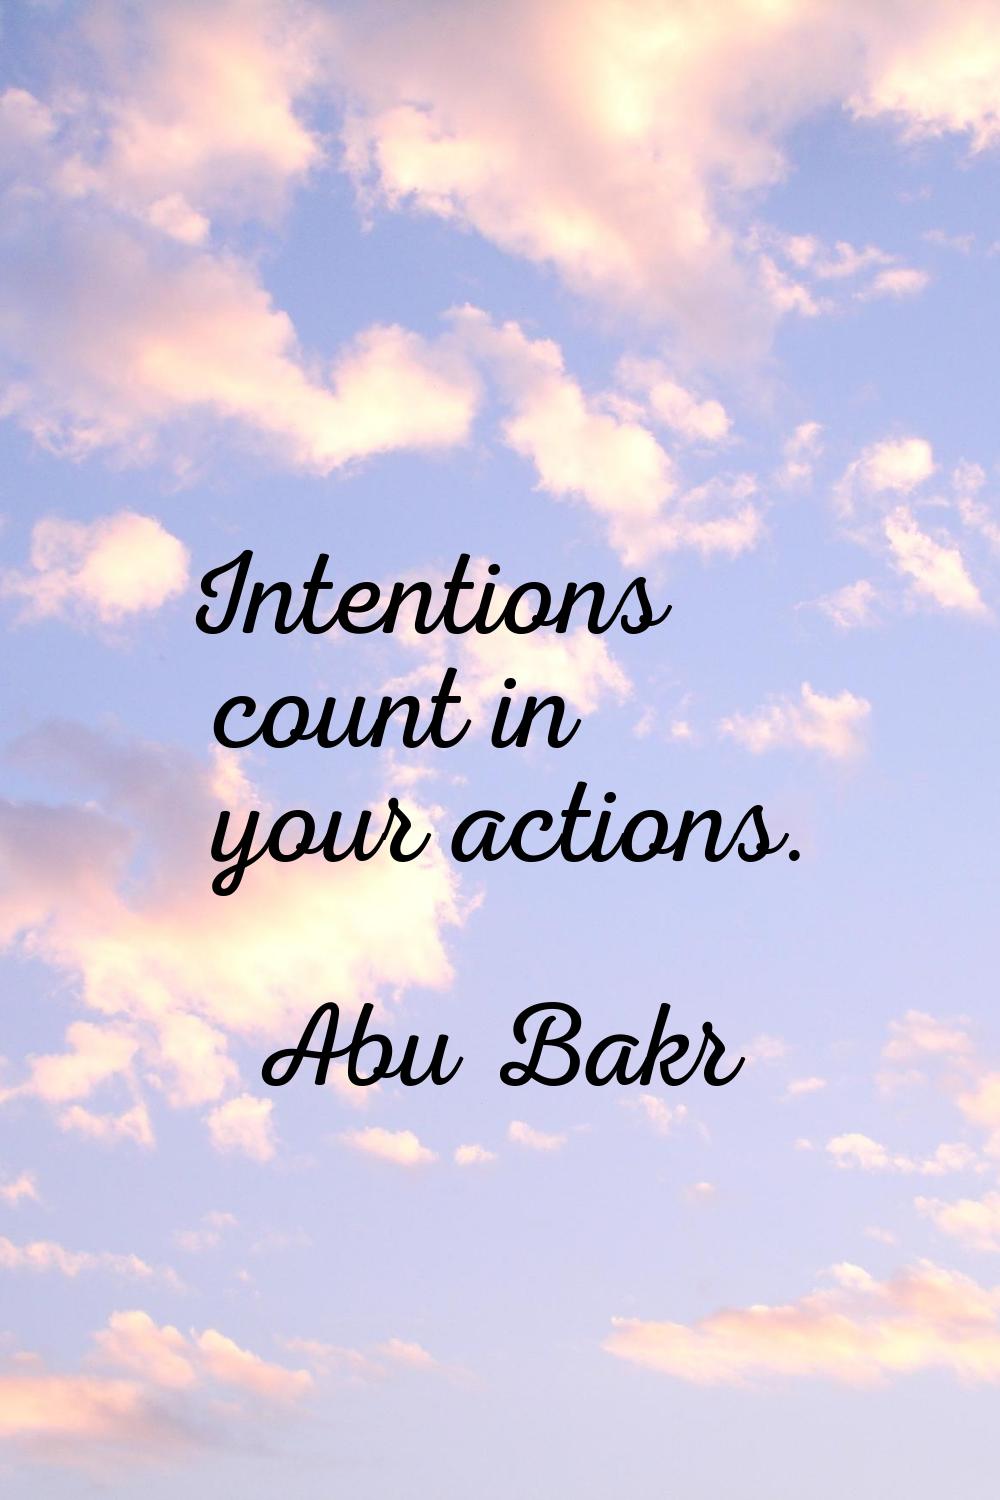 Intentions count in your actions.